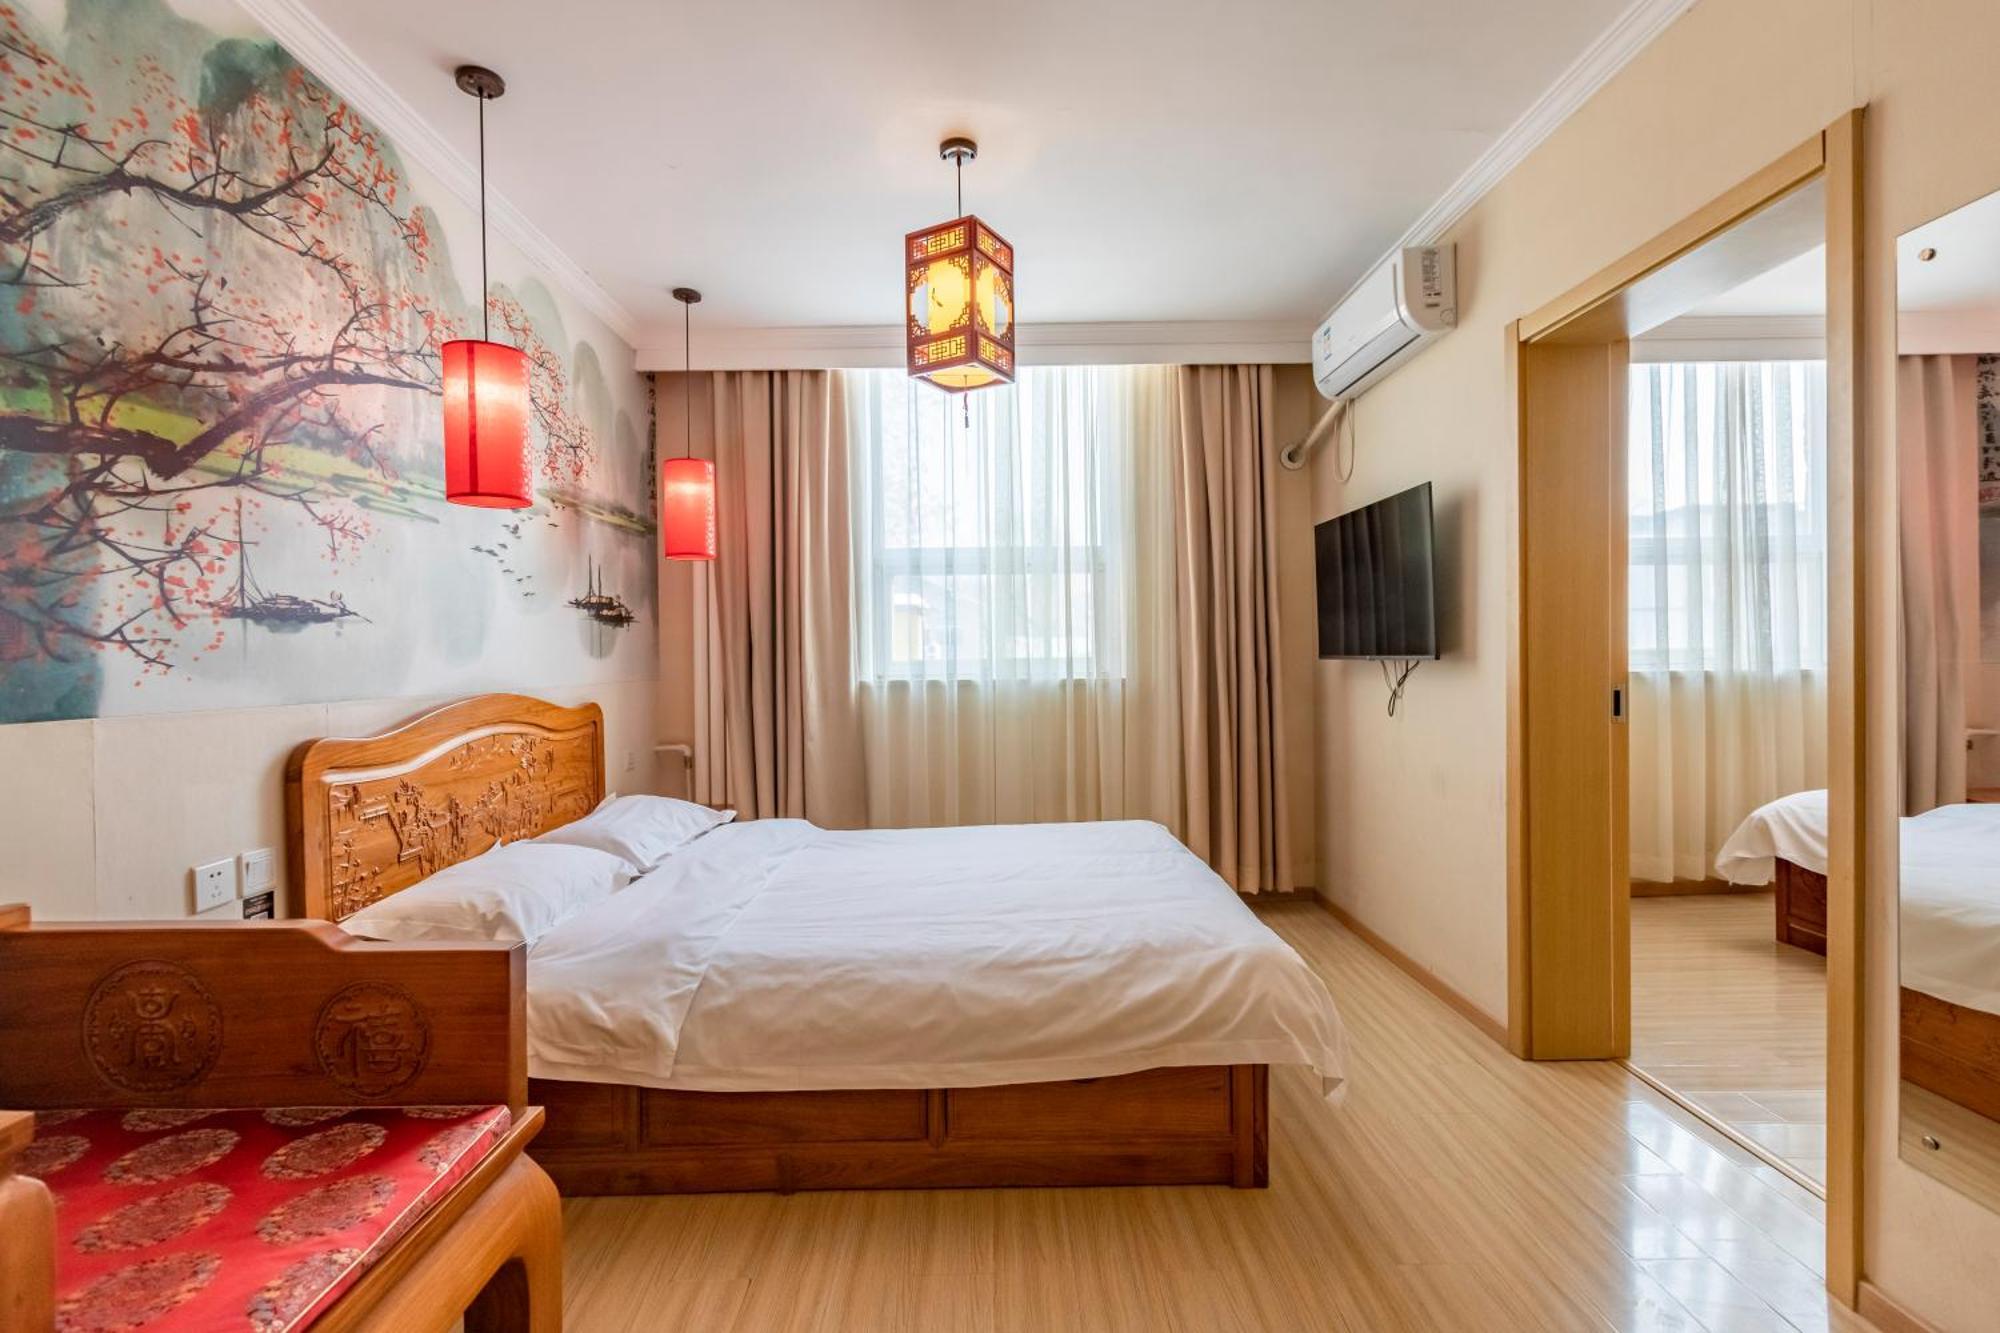 Happy Dragon Alley Hotel-In The City Center With Big Window&Free Coffe, Fluent English Speaking,Tourist Attractions Ticket Service&Food Recommendation,Near Tian Anmen Forbiddencity,Near Lama Temple,Easy To Walk To Nanluoalley&Shichahai Beijing Exterior photo